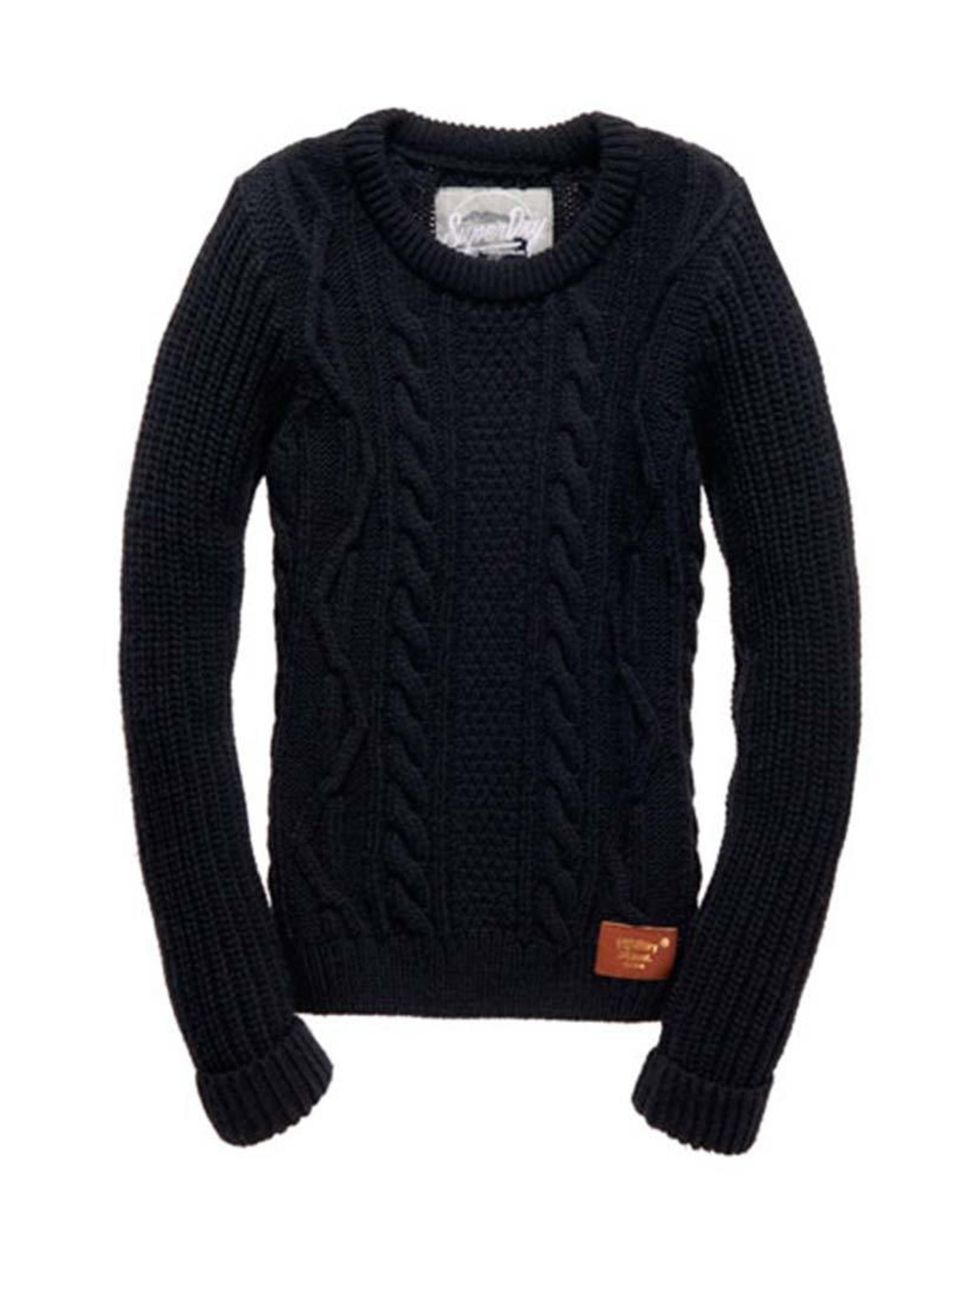 <p>Digital Director Phebe Hunnicut is adding another layer with this <a href="http://www.superdry.com/womens/knitwear/details/47818/super-cable-crew-" target="_blank">Superdry</a> cable knit jumper, £59.99.</p>